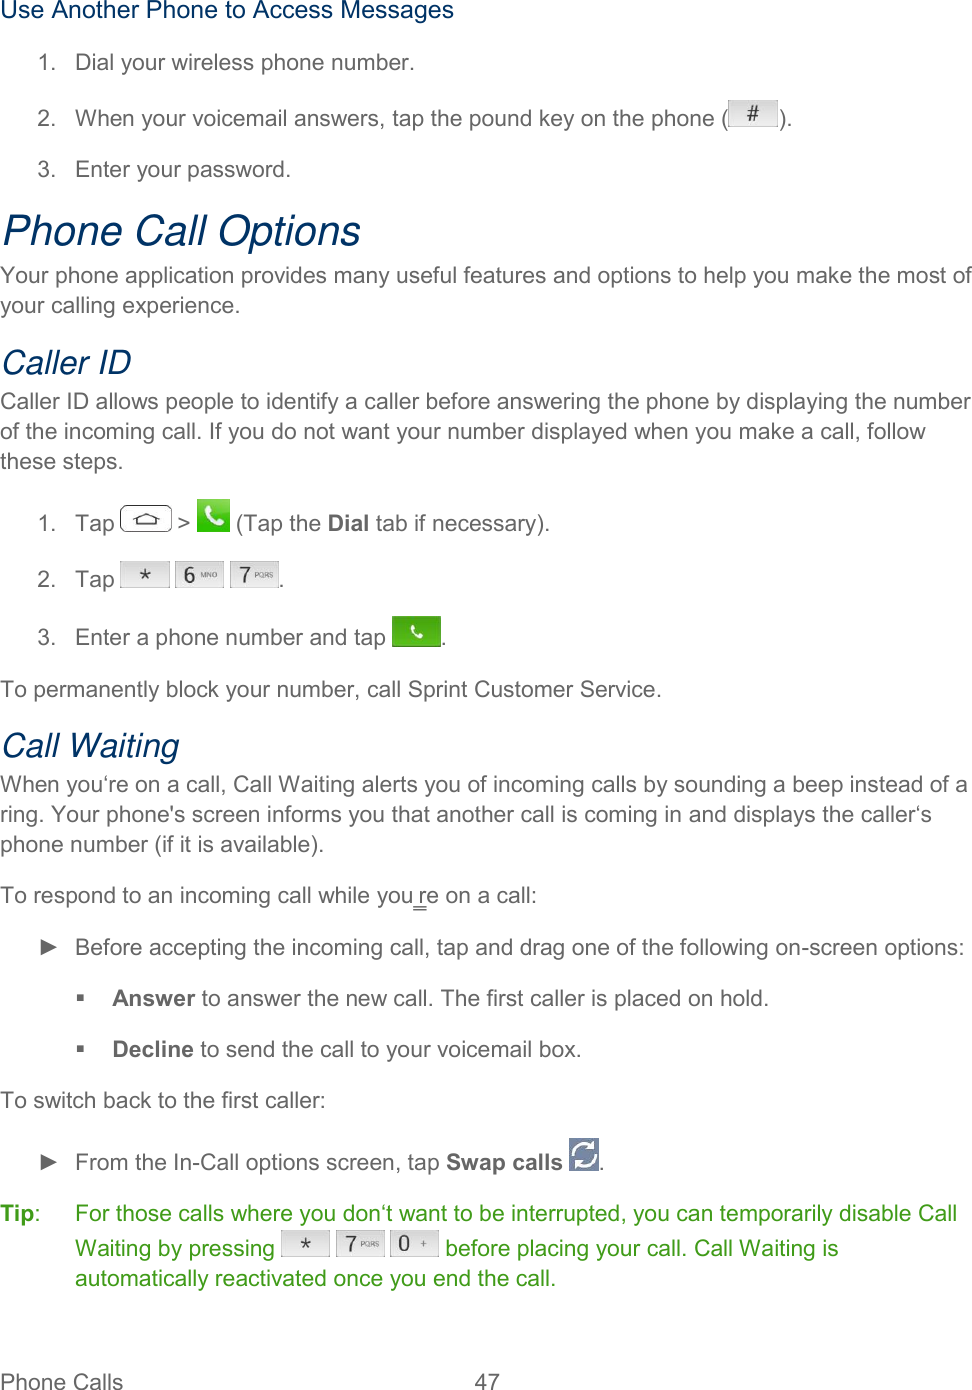  Phone Calls  47   Use Another Phone to Access Messages 1.  Dial your wireless phone number. 2.  When your voicemail answers, tap the pound key on the phone ( ). 3.  Enter your password.  Phone Call Options Your phone application provides many useful features and options to help you make the most of your calling experience. Caller ID Caller ID allows people to identify a caller before answering the phone by displaying the number of the incoming call. If you do not want your number displayed when you make a call, follow these steps. 1.  Tap   &gt;   (Tap the Dial tab if necessary). 2.  Tap      . 3.  Enter a phone number and tap  . To permanently block your number, call Sprint Customer Service. Call Waiting When you‘re on a call, Call Waiting alerts you of incoming calls by sounding a beep instead of a ring. Your phone&apos;s screen informs you that another call is coming in and displays the caller‘s phone number (if it is available). To respond to an incoming call while you‗re on a call: ►  Before accepting the incoming call, tap and drag one of the following on-screen options:  Answer to answer the new call. The first caller is placed on hold.  Decline to send the call to your voicemail box. To switch back to the first caller: ►  From the In-Call options screen, tap Swap calls  . Tip:  For those calls where you don‘t want to be interrupted, you can temporarily disable Call Waiting by pressing       before placing your call. Call Waiting is automatically reactivated once you end the call. 